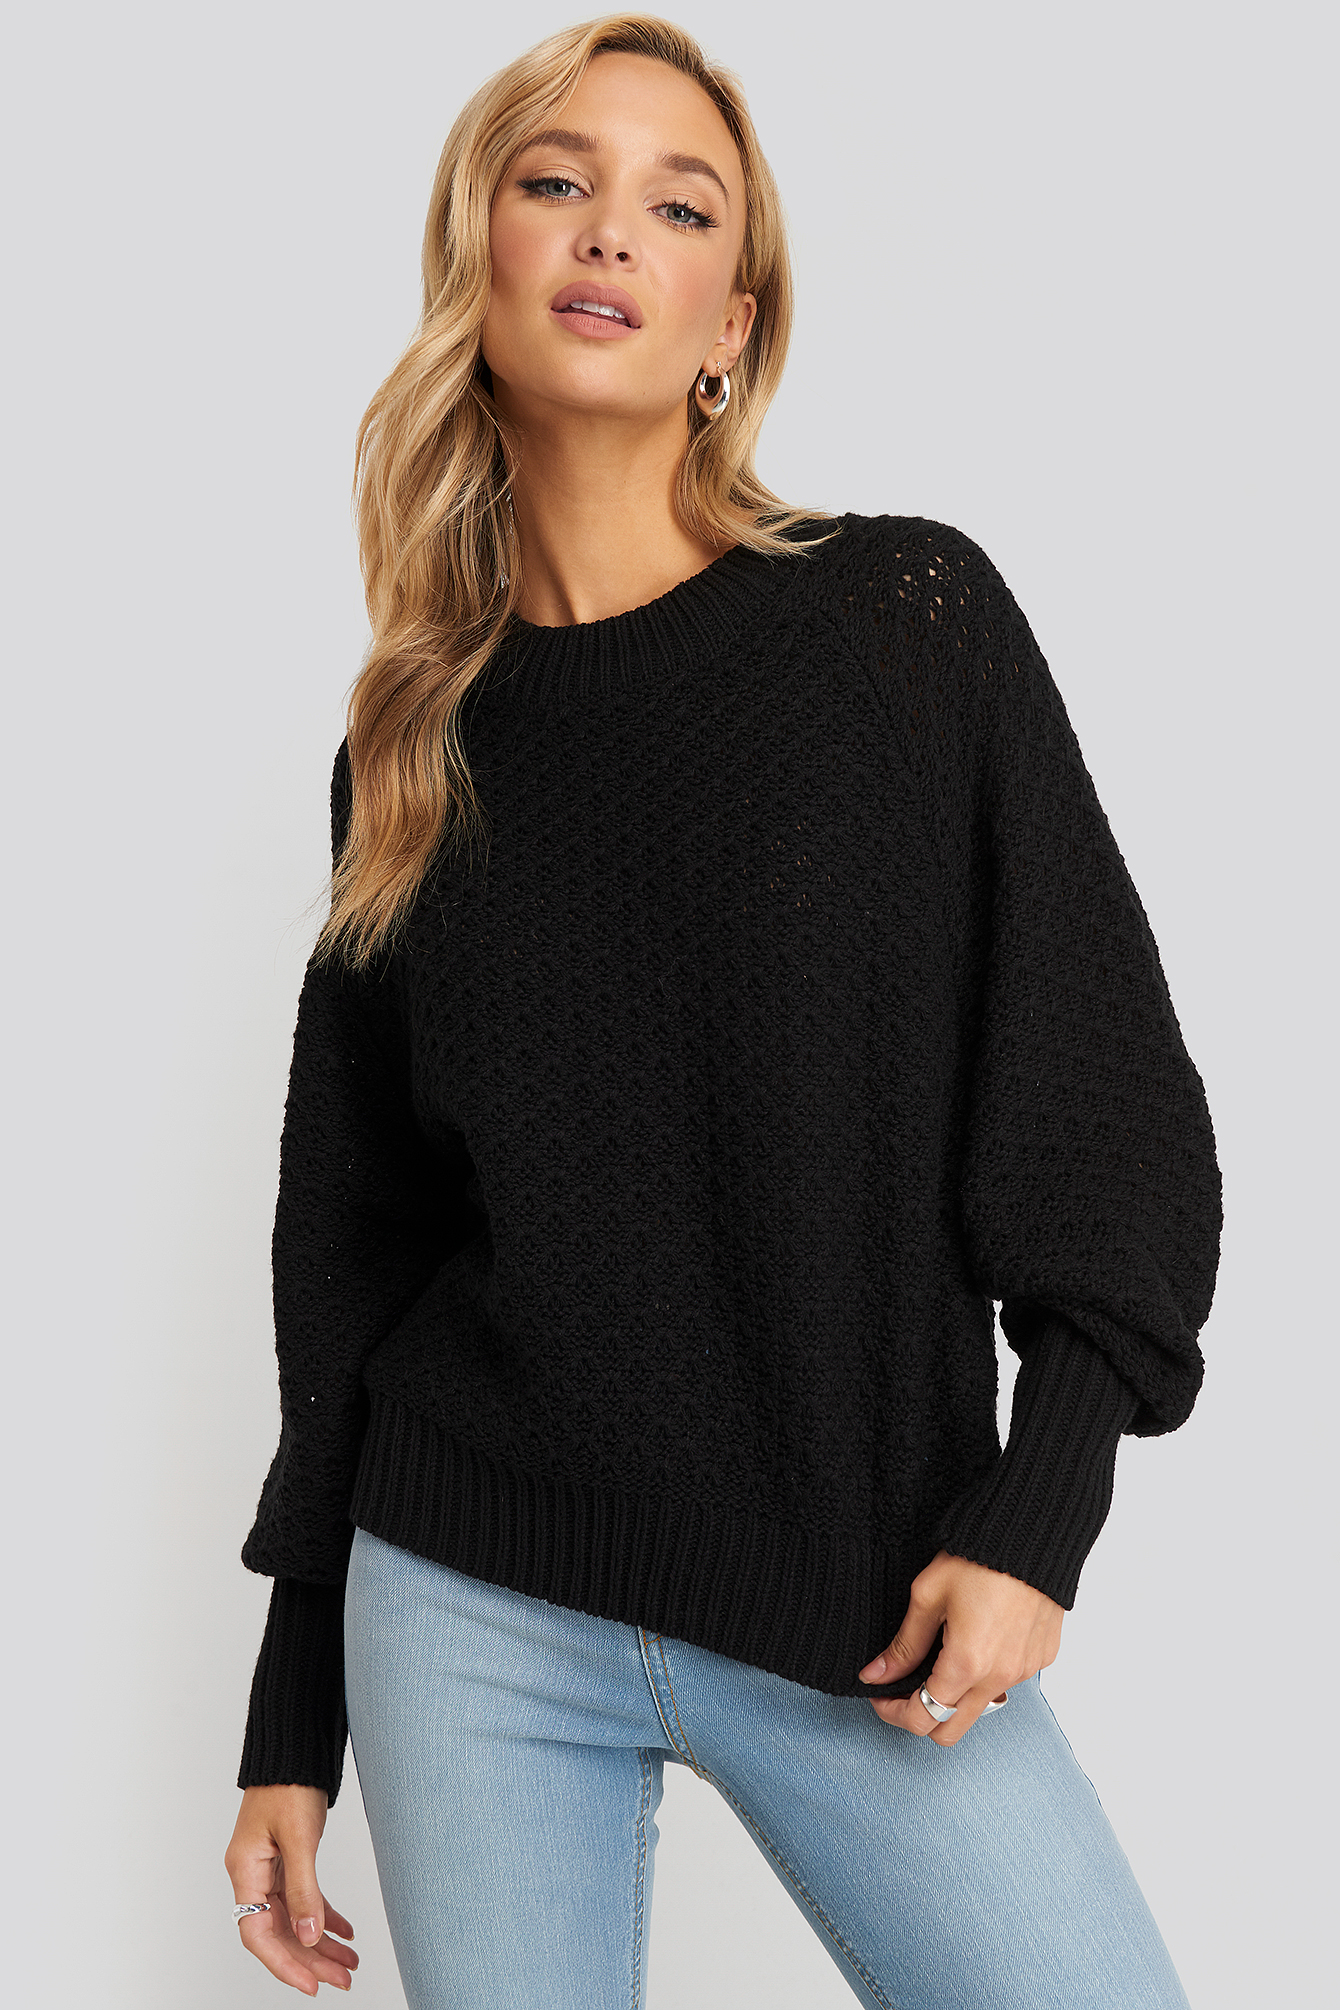 Black Batwing Knitted Sweater